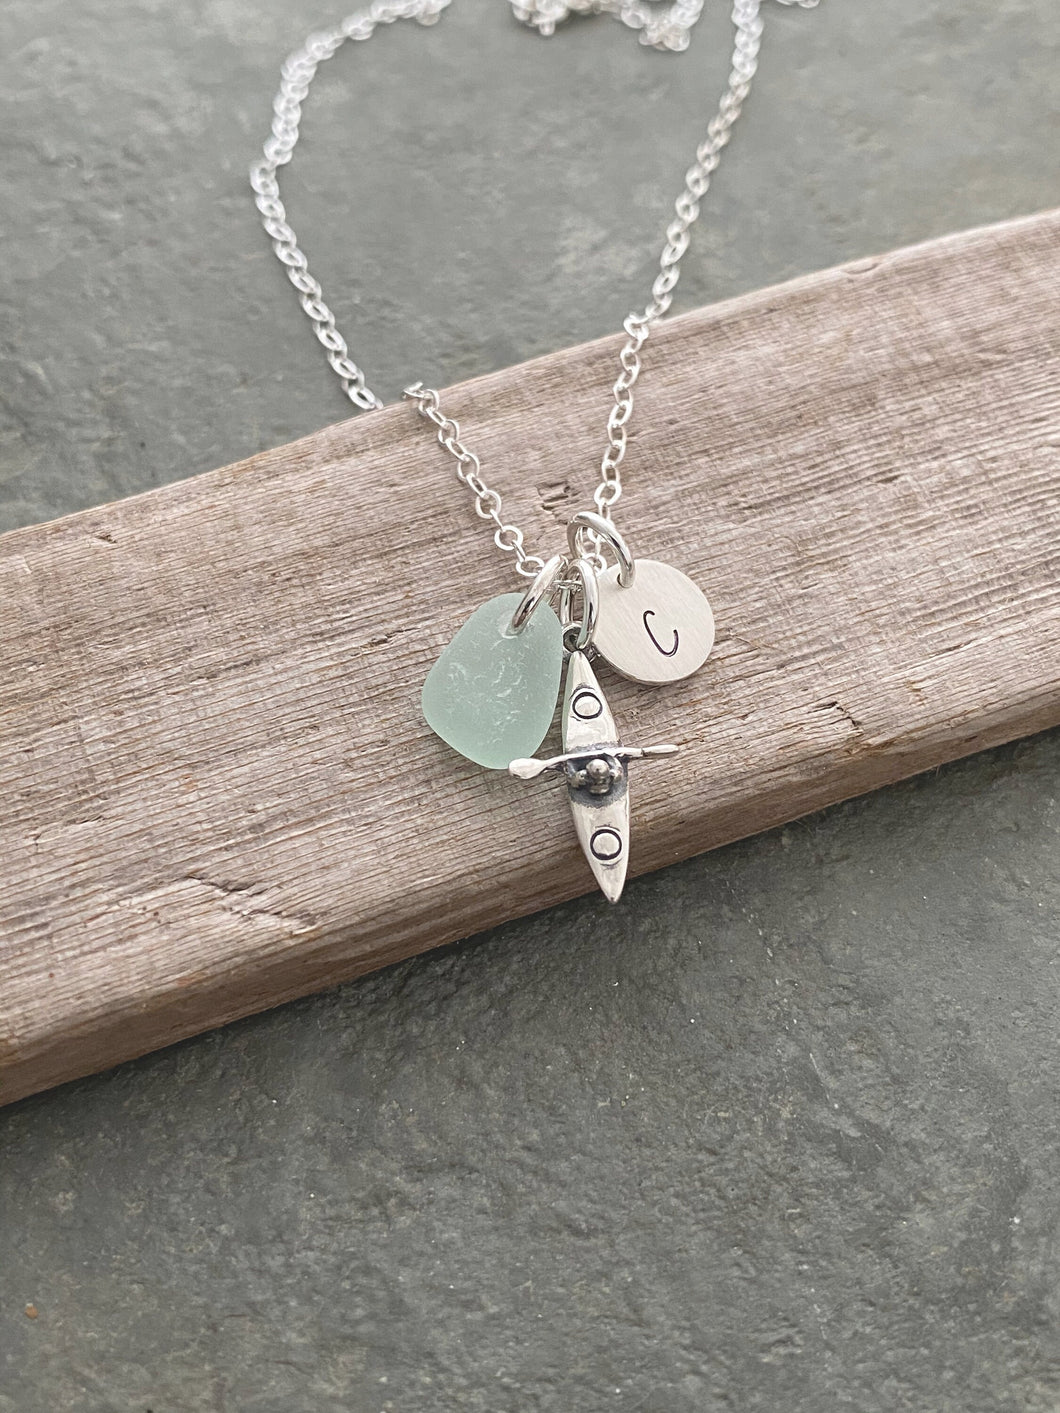 Sterling Silver Kayak Charm Necklace - Genuine Sea Glass - Personalized Initial Disc - Paddler, Watersports, Hawaii Outdoors - gift for her